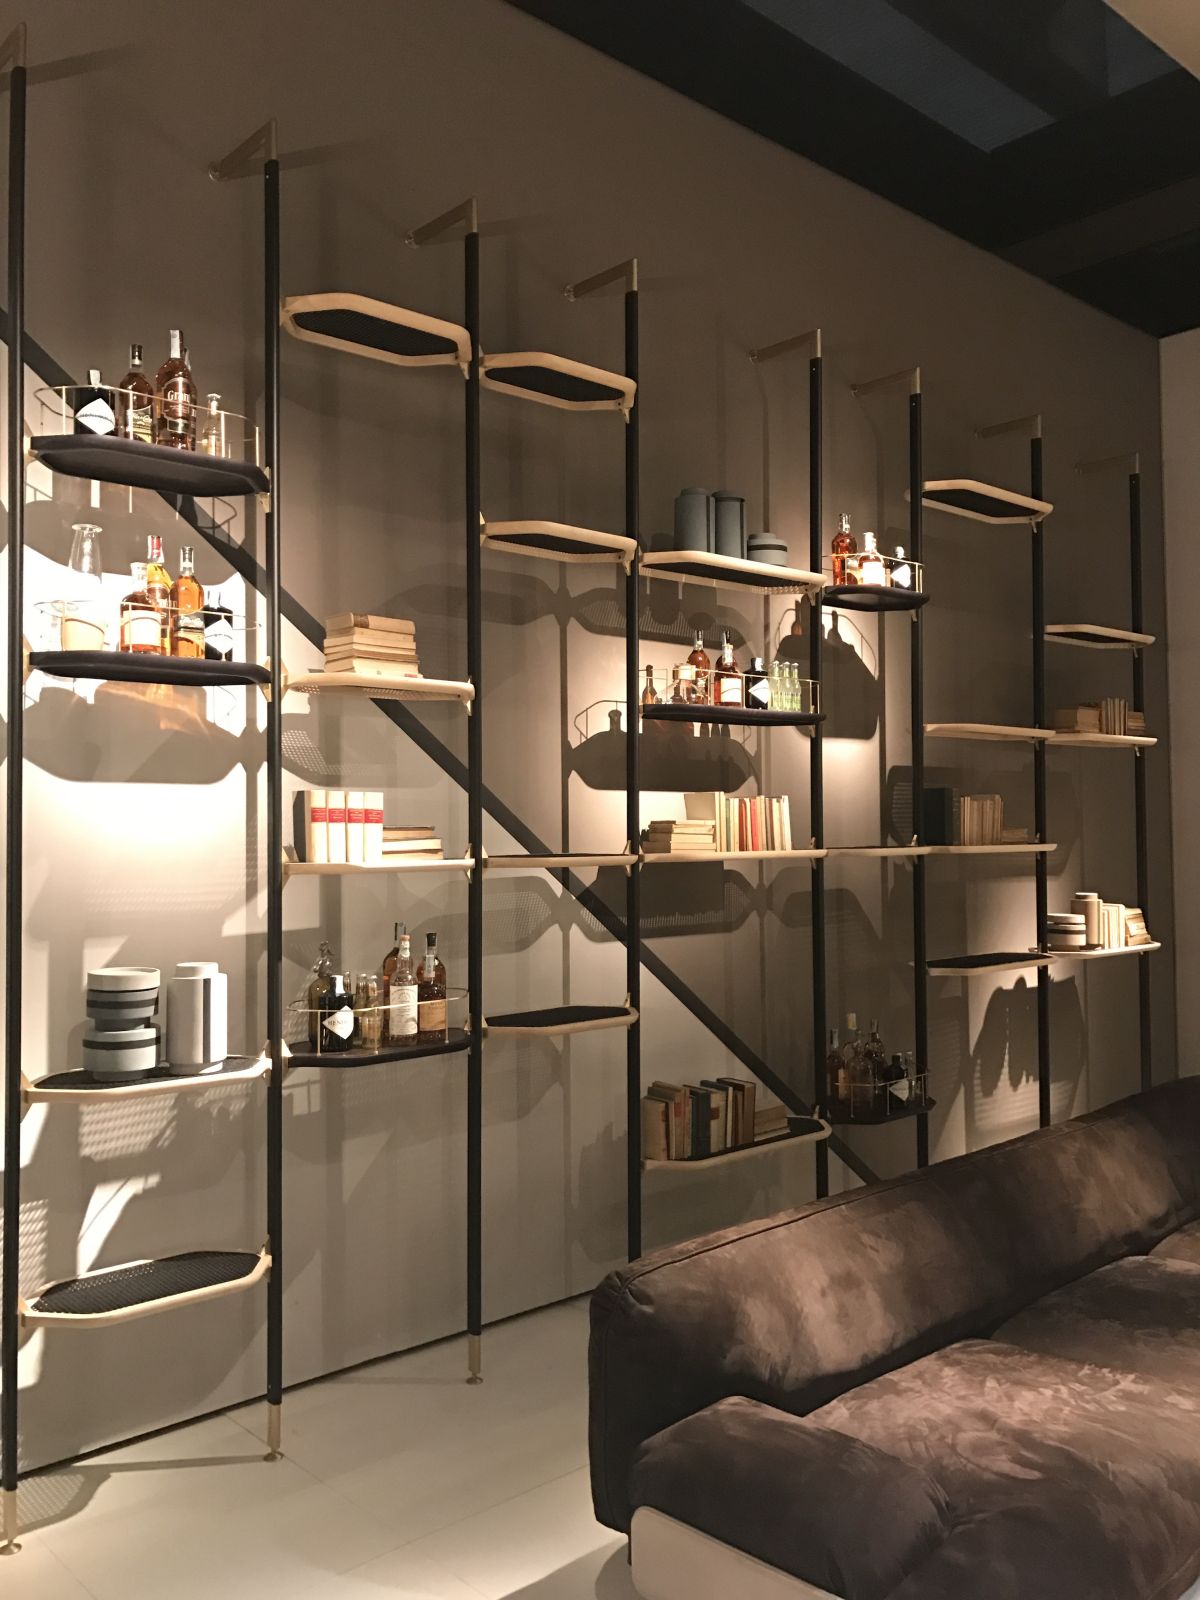 Display multiple shelves at various different heights to create a unique and asymmetrical installation